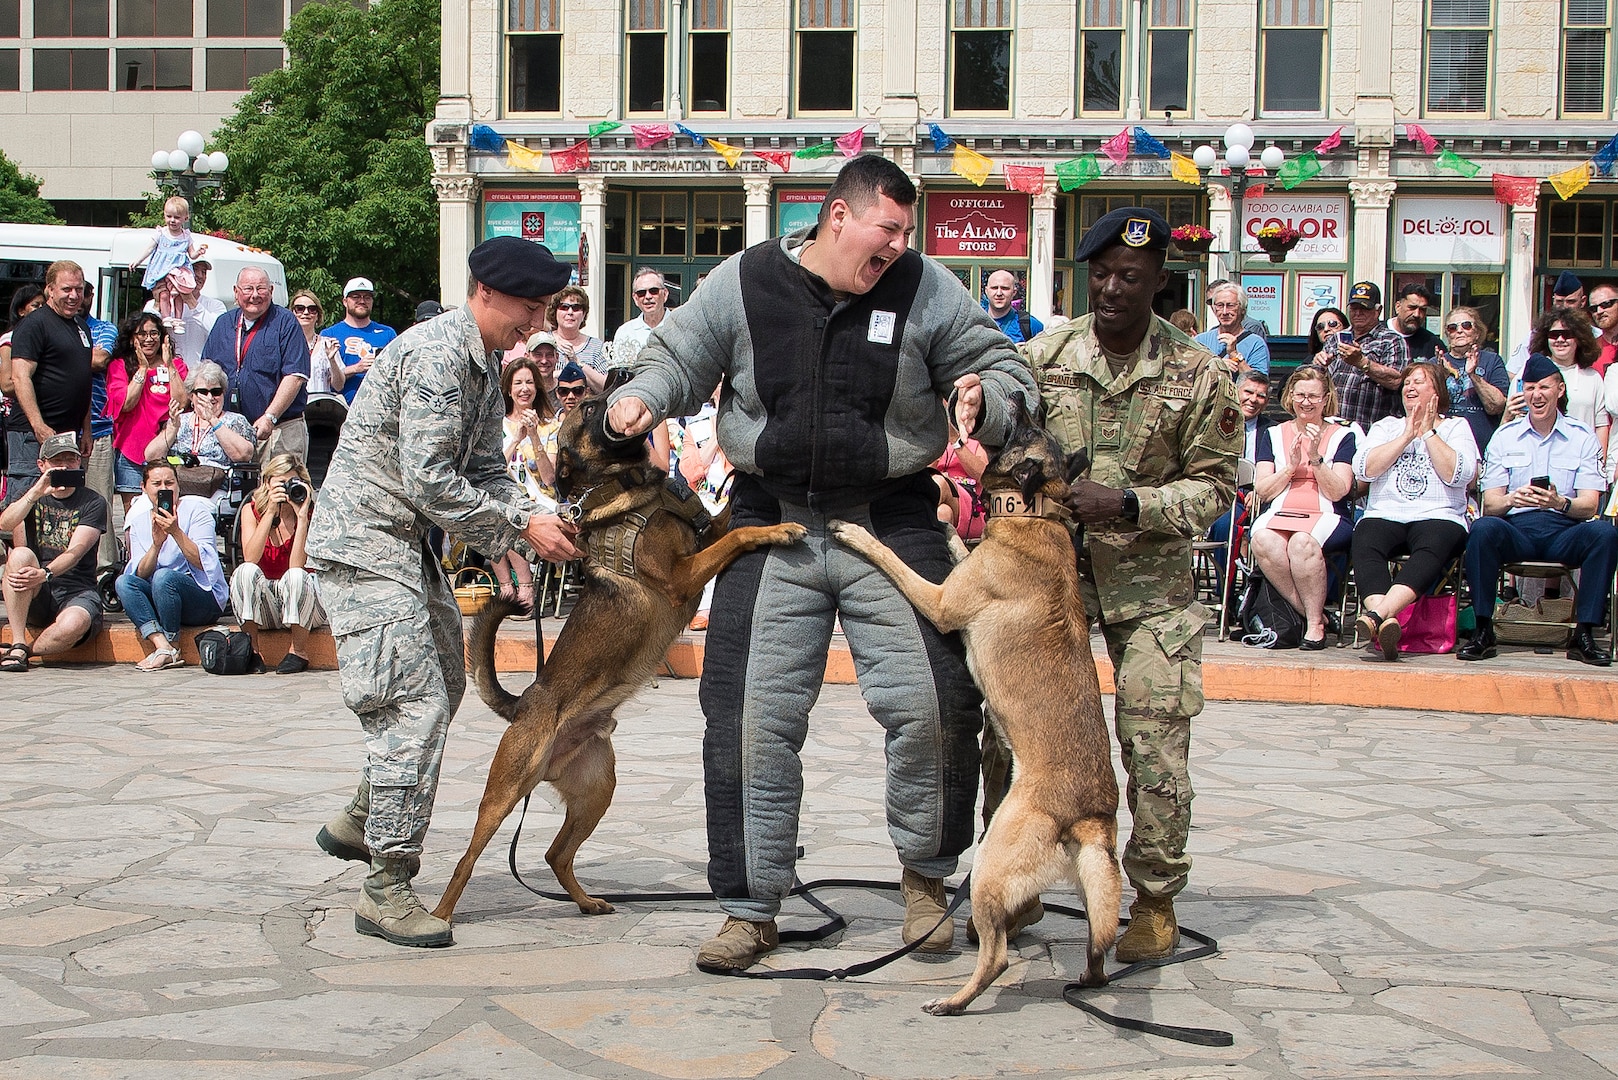 Members of the 802nd Security Force Squadron military working dog handlers, demonstrate MWD obedience, detection and patrol skills during San Antonio’s Fiesta Air Force Day at the Alamo, April 22, 2019. From its beginning in 1891, Fiesta has grown into an annual celebration that includes civic and military observances, street and river parades, exhibits, pilgrimages and memorials.